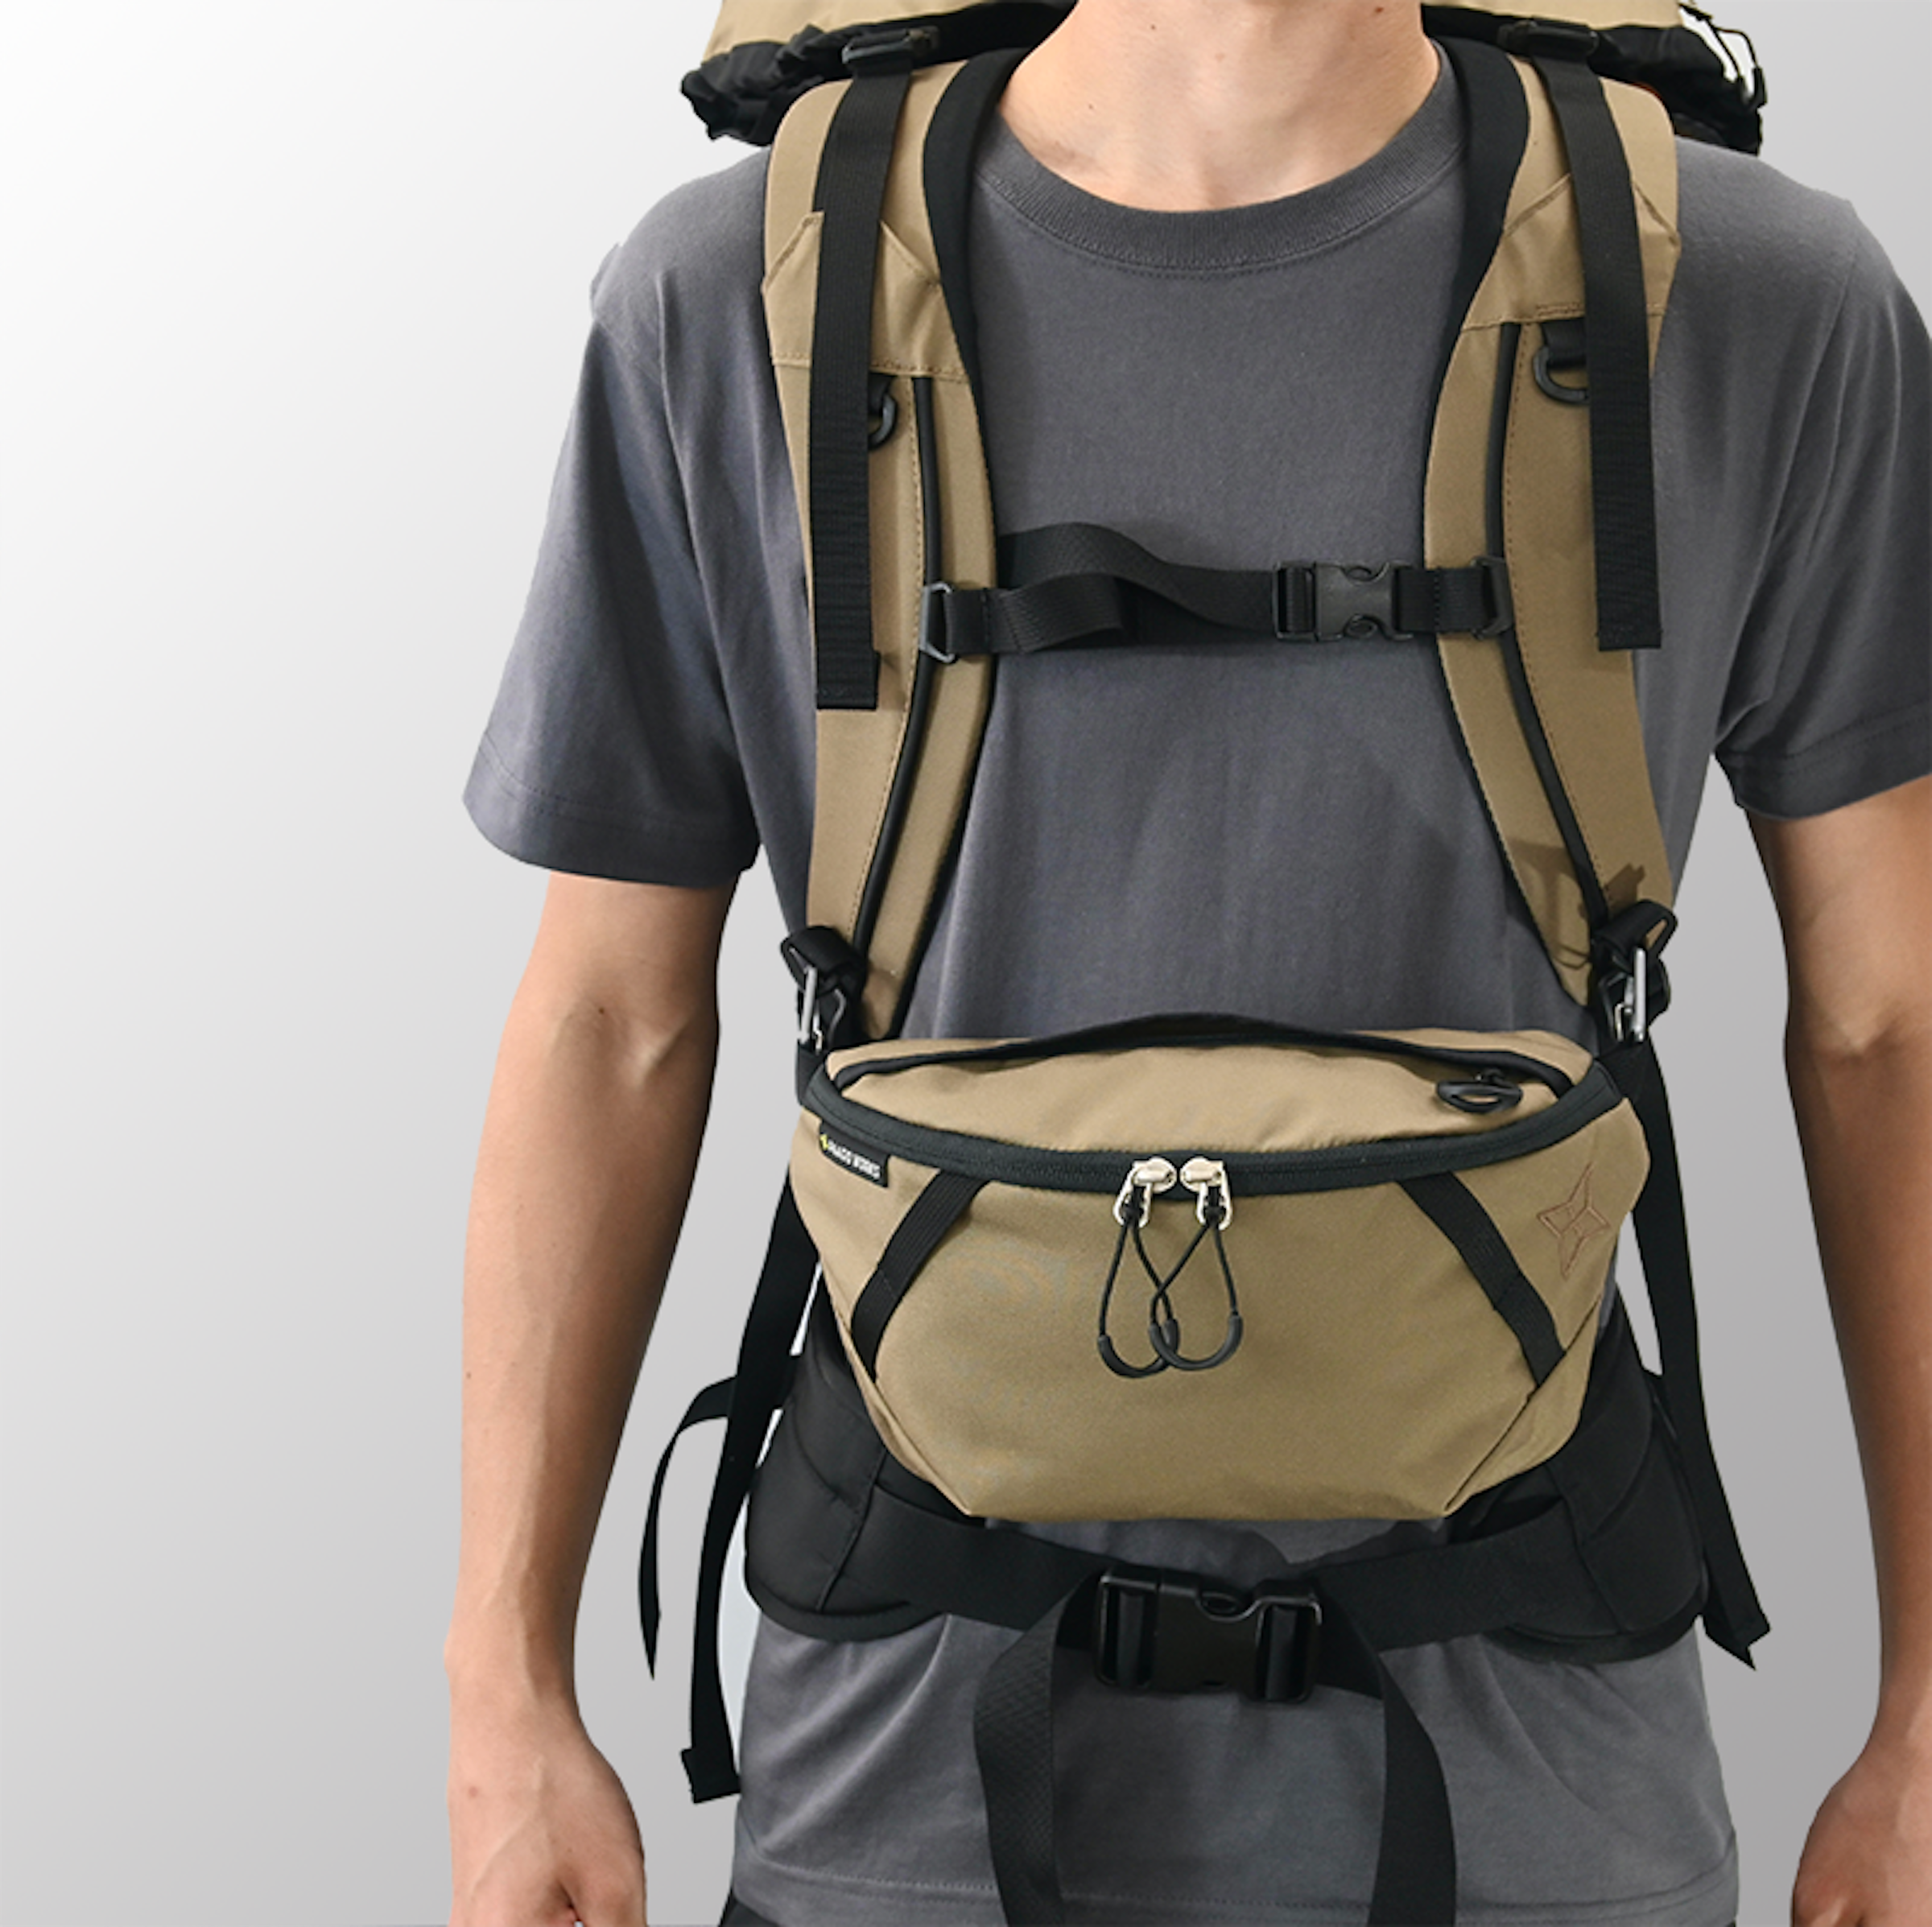 Example of using Switch L. When fixed to the shoulder harness of a backpack using a hook, it becomes a chest bag. As the weight is evenly distributed and not biased to one side, it reduces the burden on the shoulders and is very comfortable.